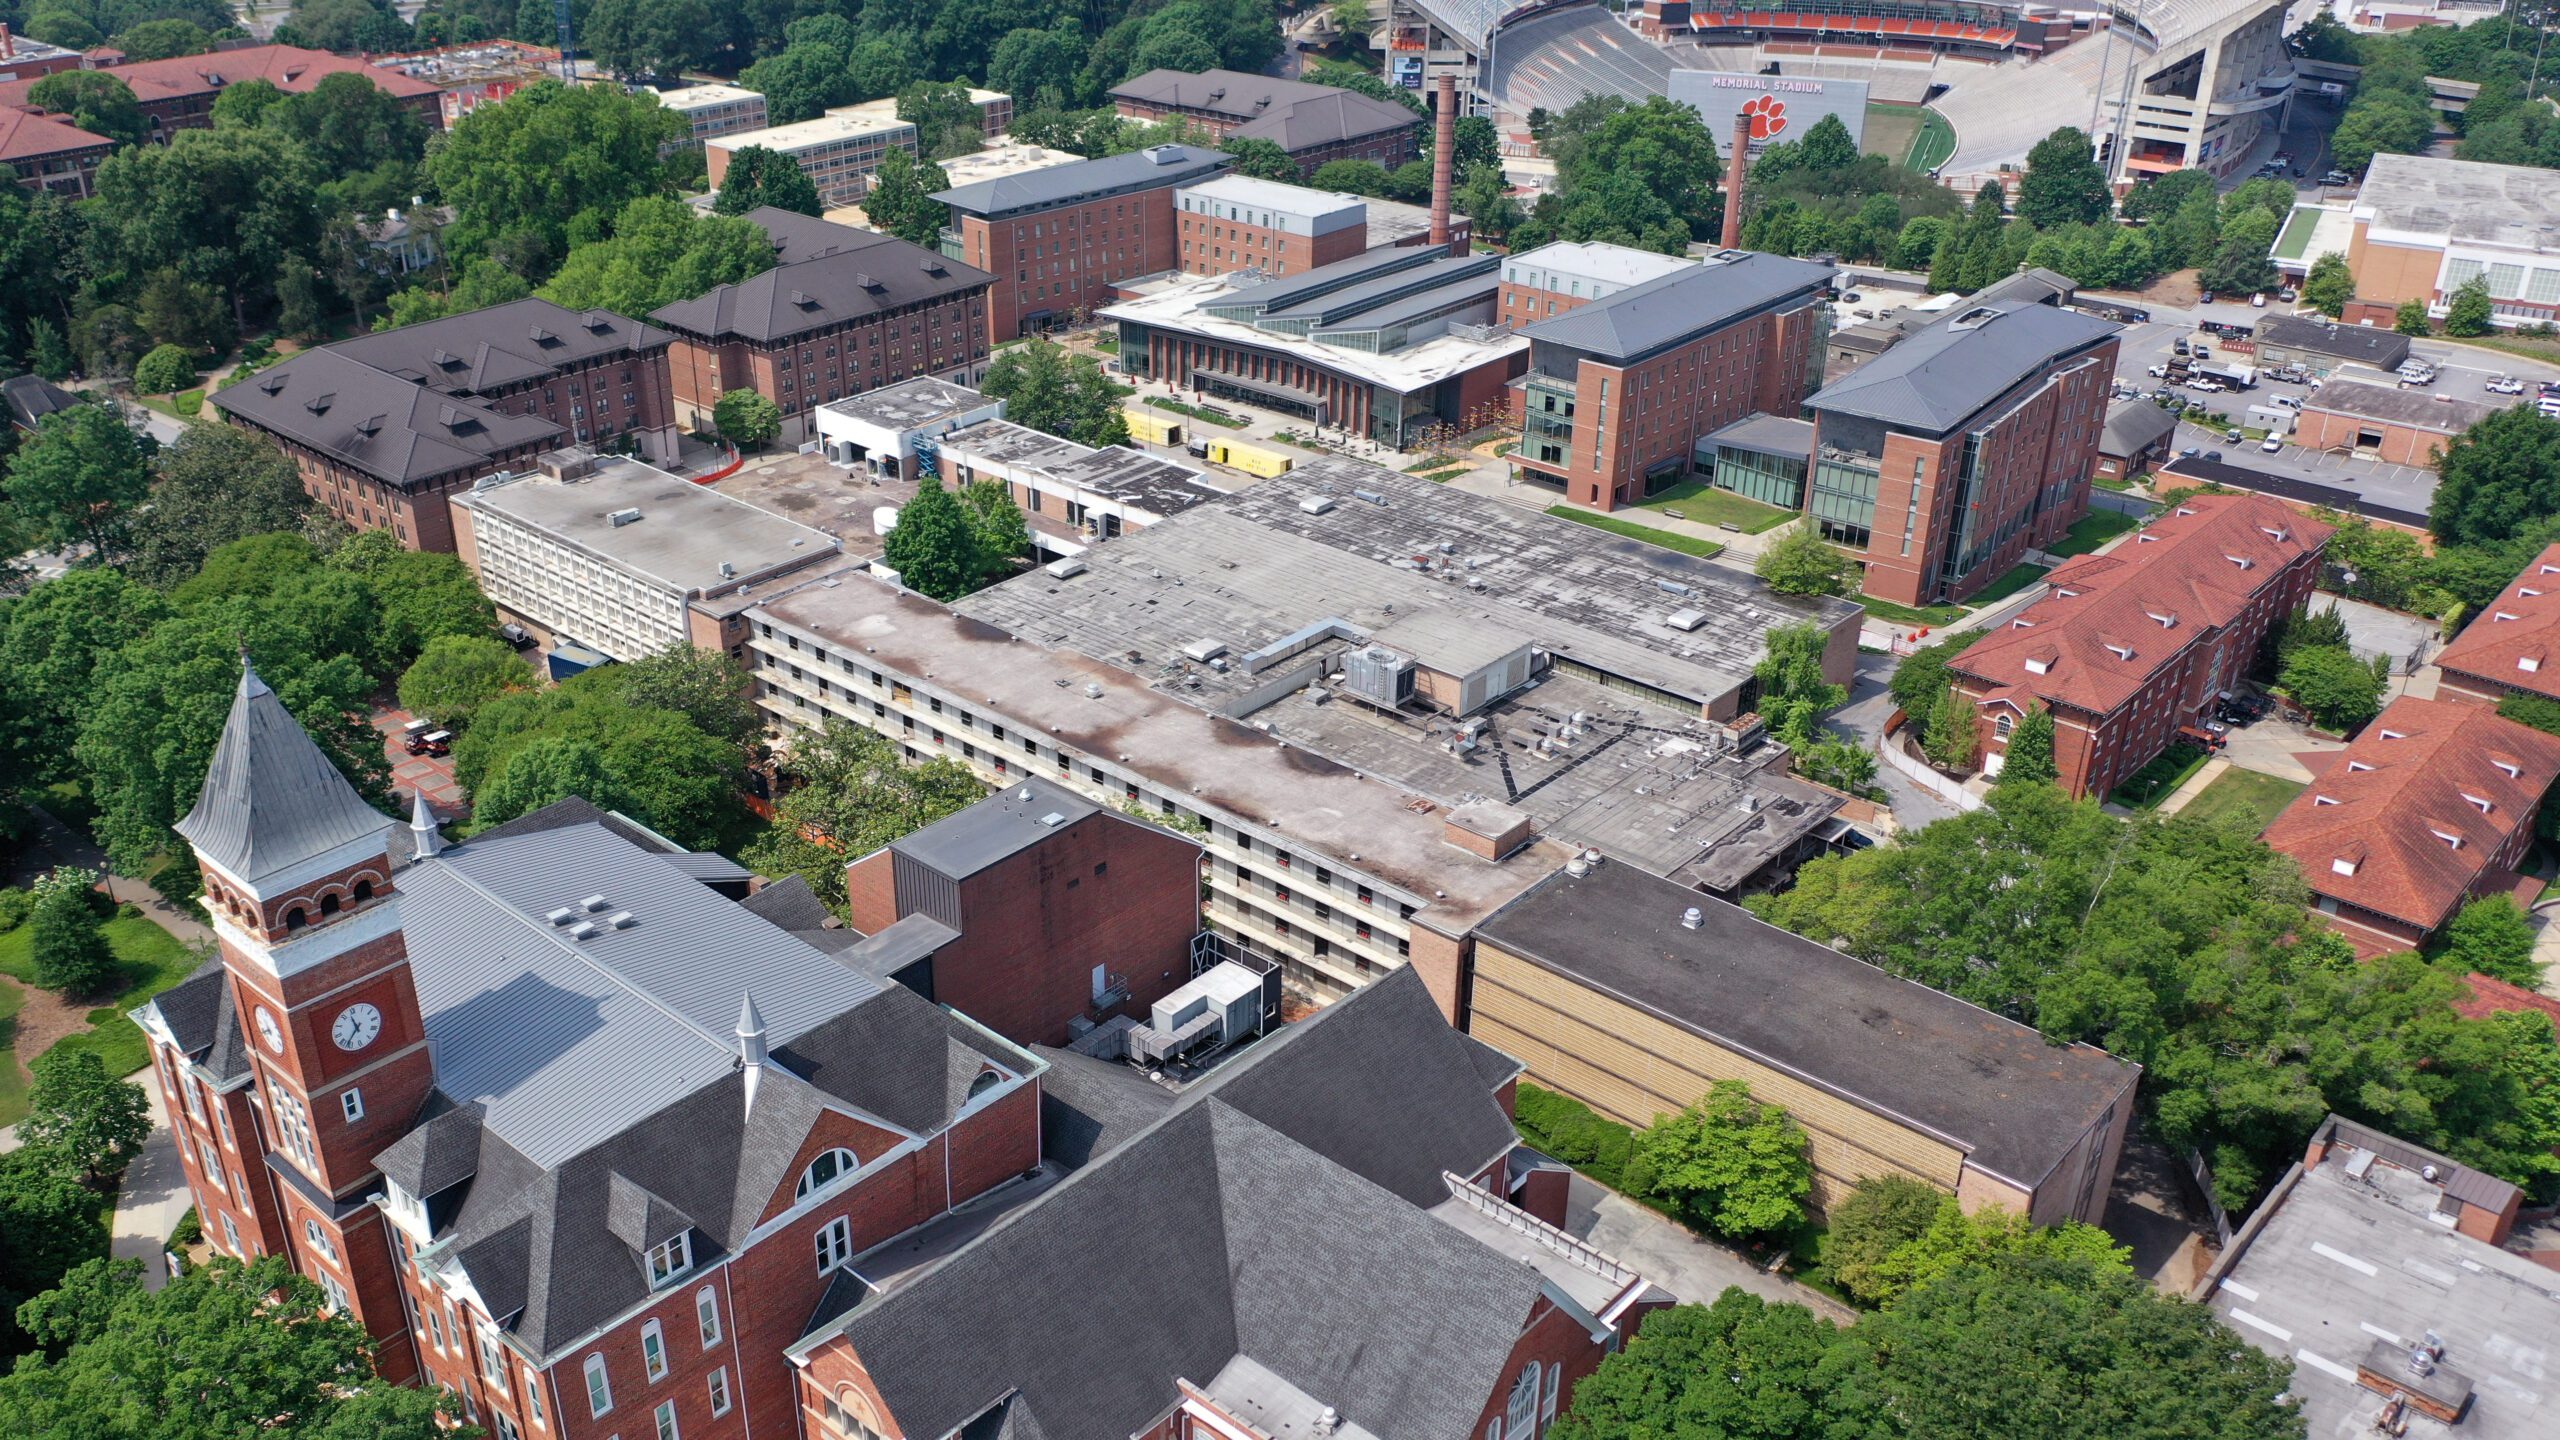 An overhead view of Clemson University's campus, with Johnstone Hall/University Union in the center